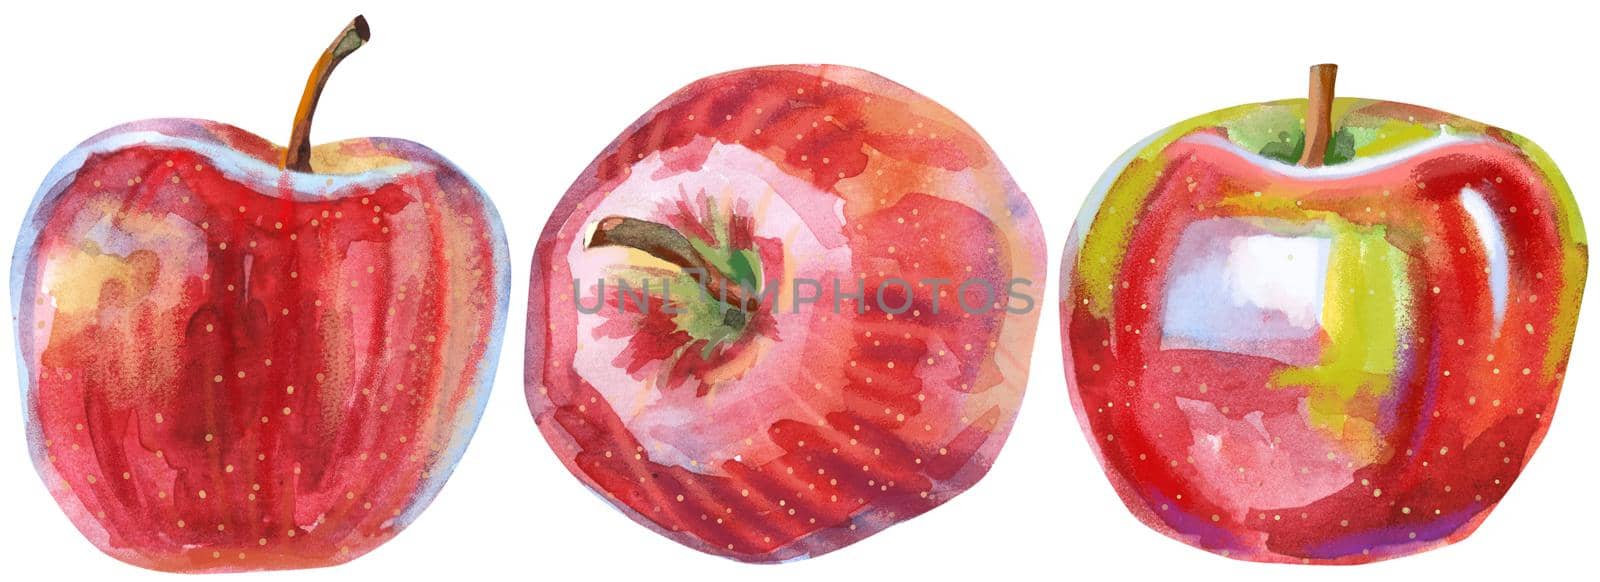 Set of botanical watercolor illustration of red ripe apples isolated on a white background